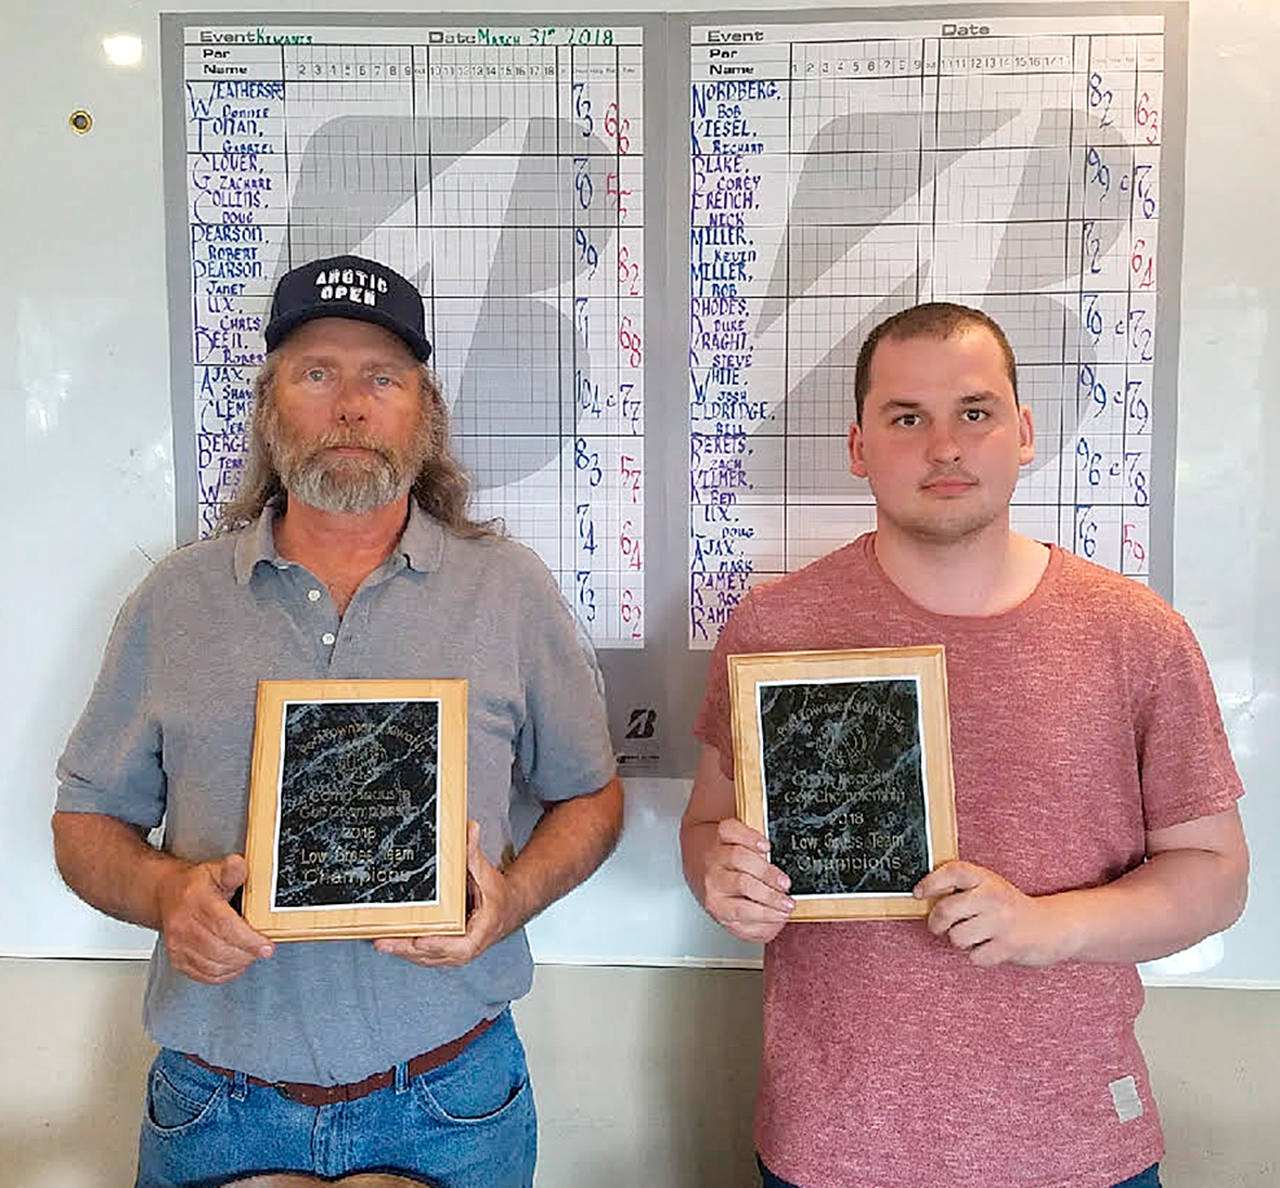 Doug Collins, left, and Zackari Glover teamed to win the Gross division at the 22nd annual Kiwanis Golf Tournament held last month at Port Townsend Golf Club. More than $10,000 was raised to support special needs children attending Camp Beausite Northwest near Chimacum. (Port Townsend Golf Club)